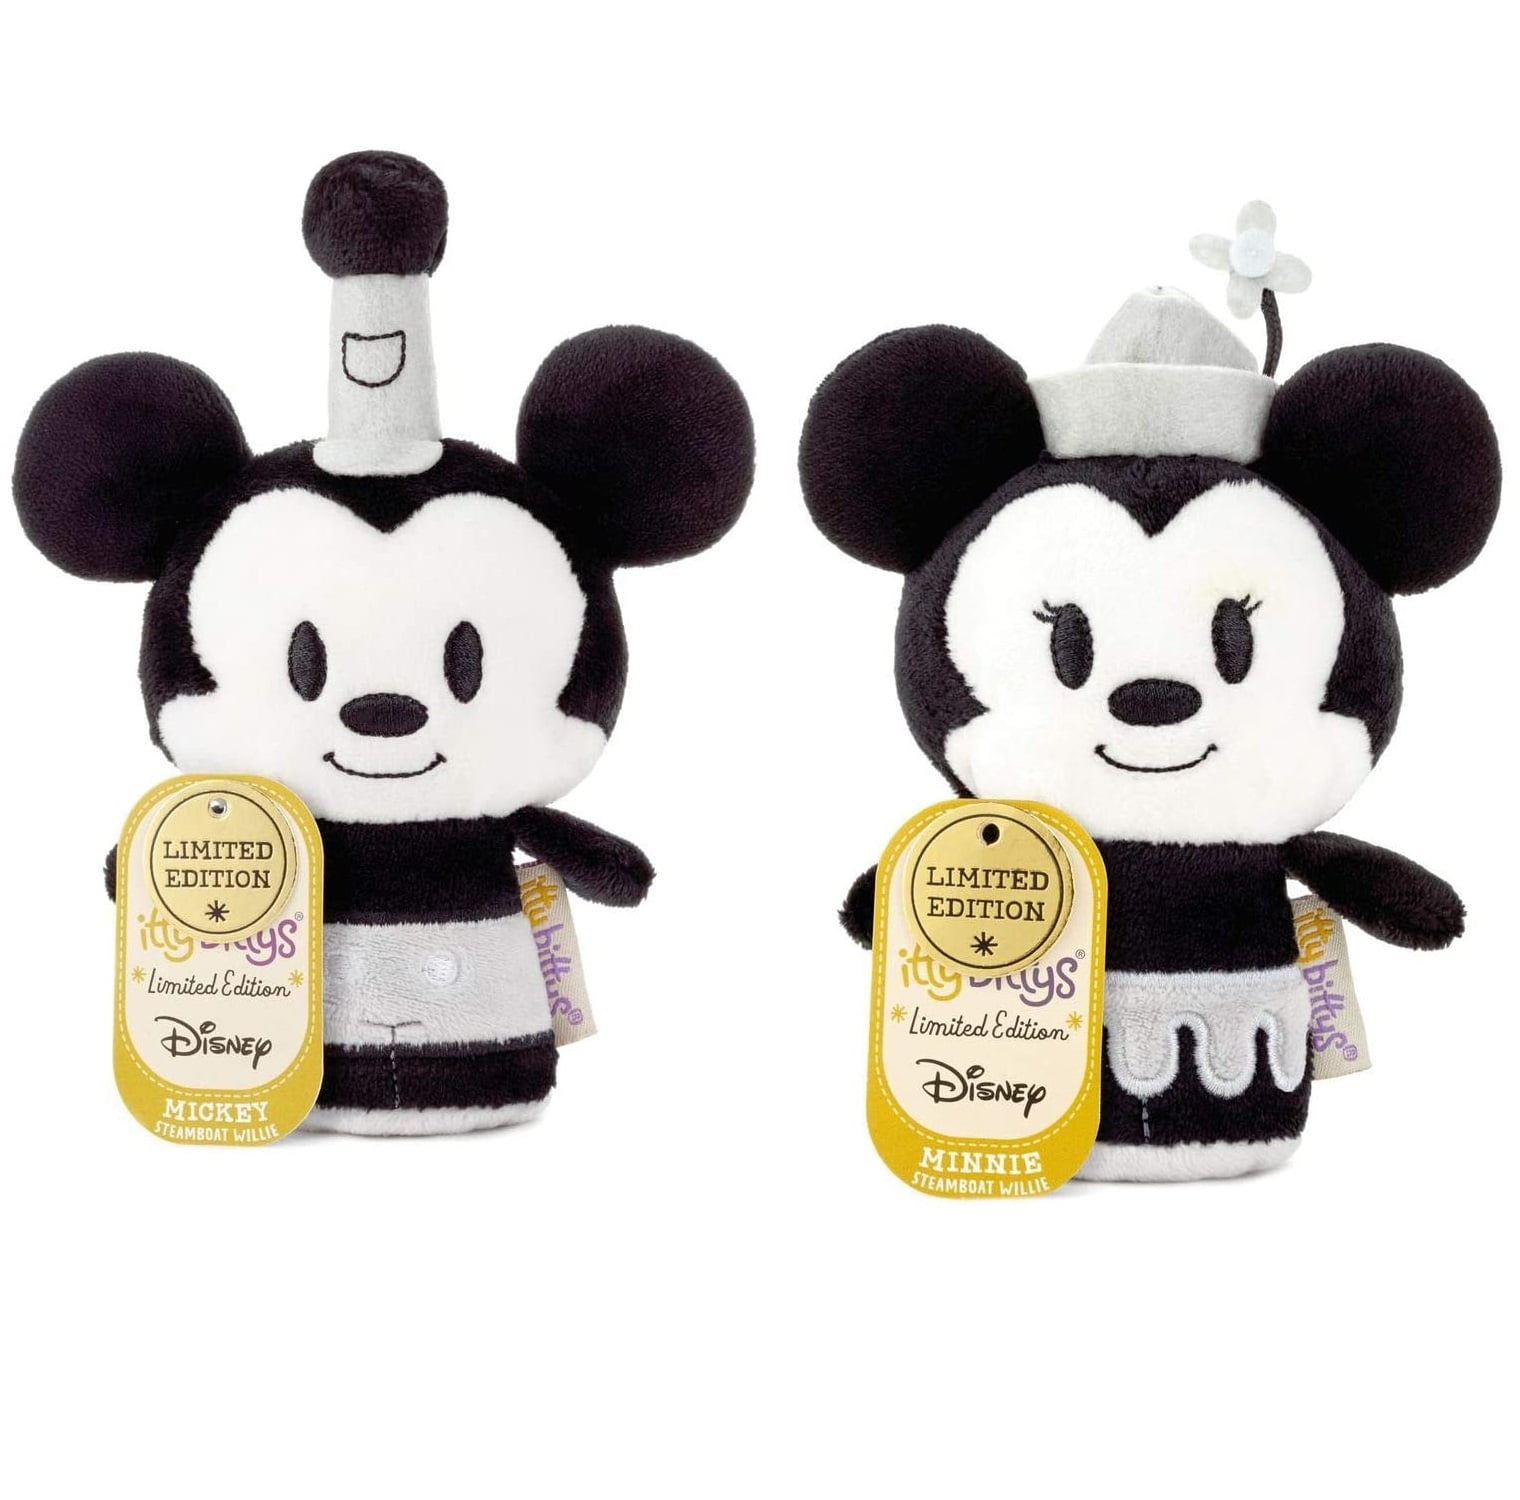 MICKEY MOUSE STEAMBOAT WILLIE PLÜSCH SOUND MOVES 90 YEARS SPECIAL EDITION 